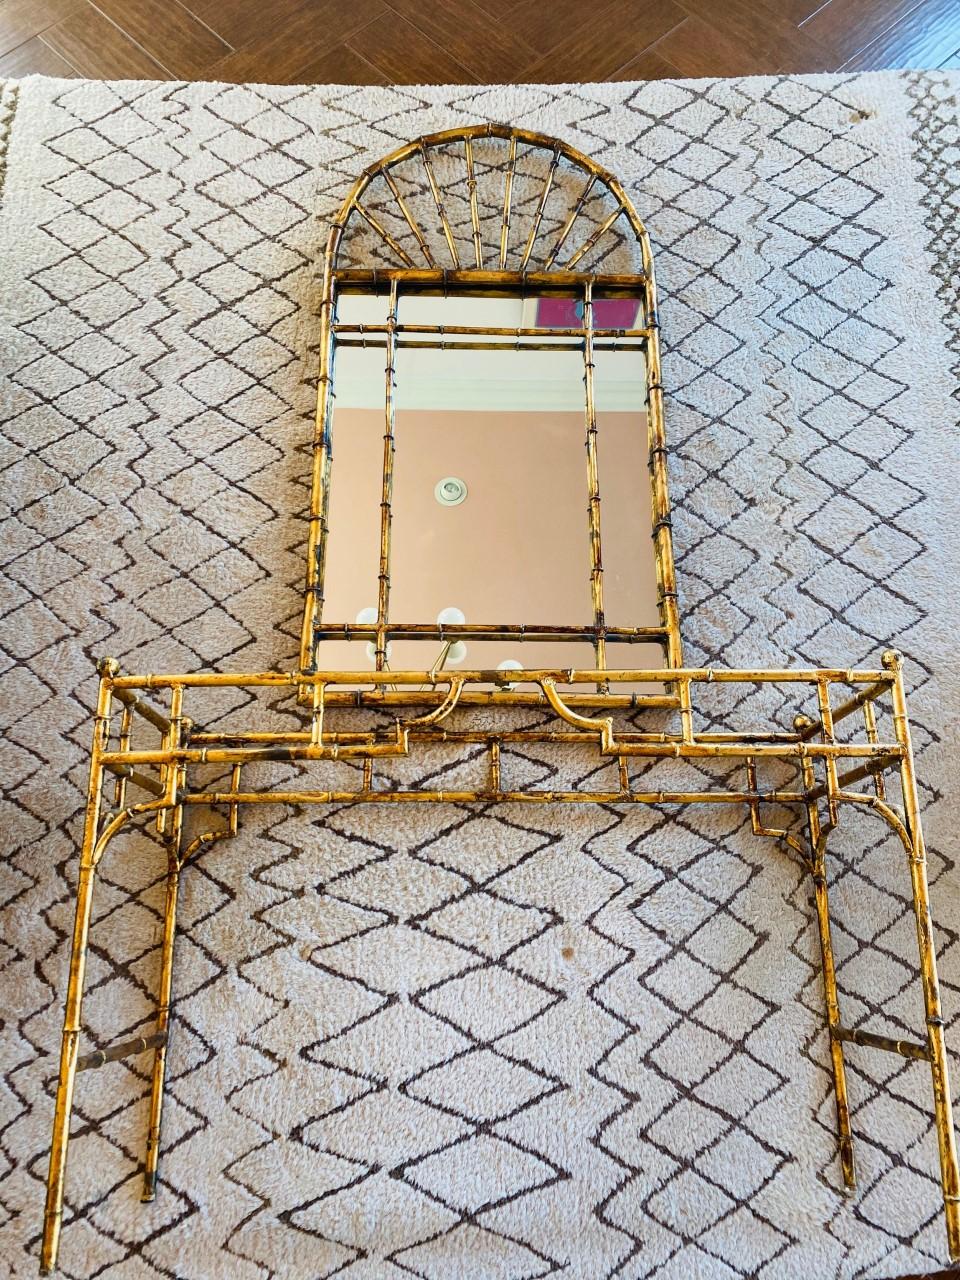 Beautiful vintage set by La Barge that brings the exact amount of glamour and shimmer. The gilded metal mirror and console are fashioned in a sculptural rendering of bamboo that shimmers in gold. This set can complement a variety of decor styles